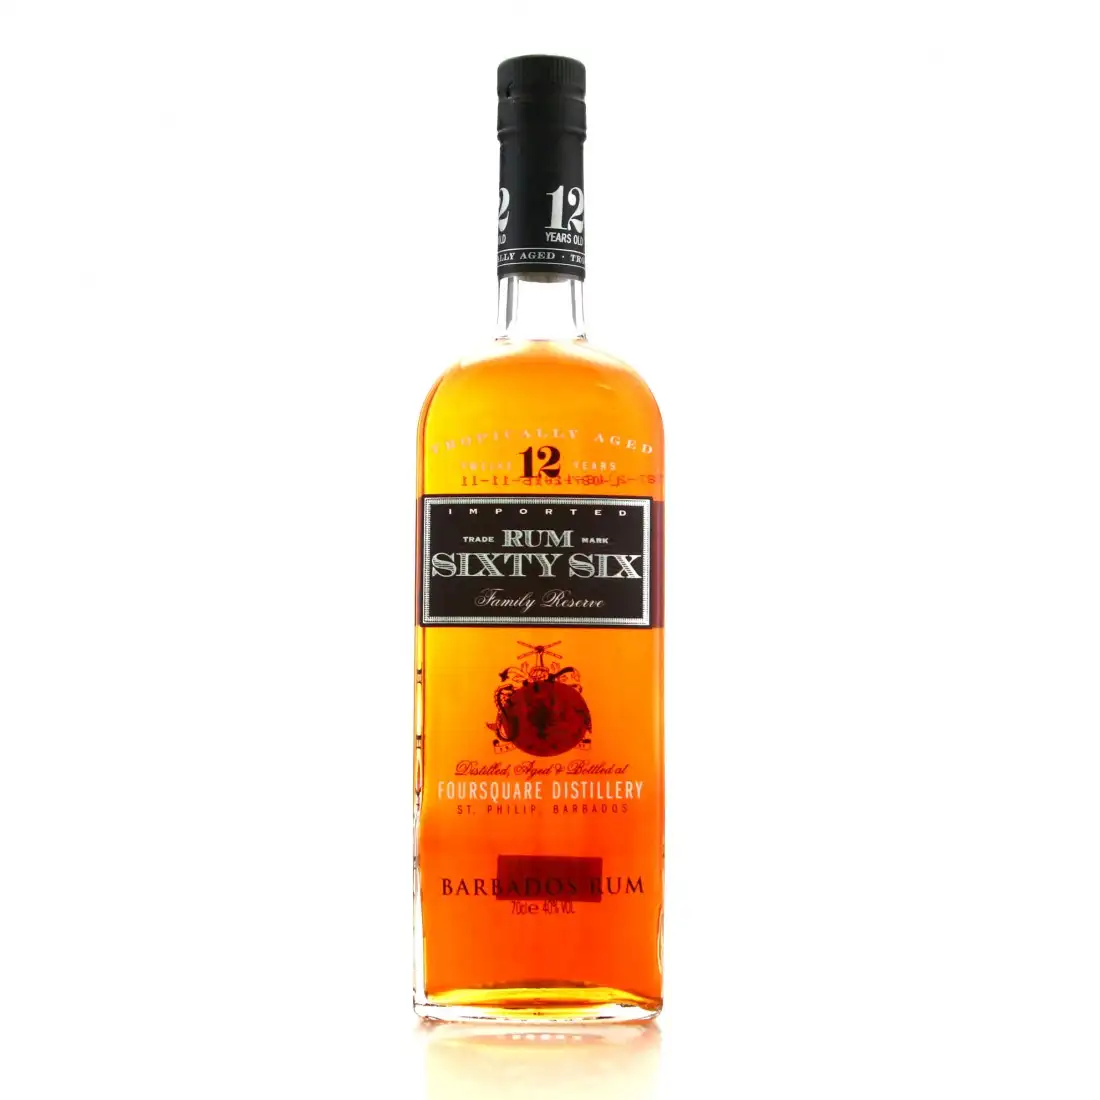 Image of the front of the bottle of the rum Sixty Six Family Reserve